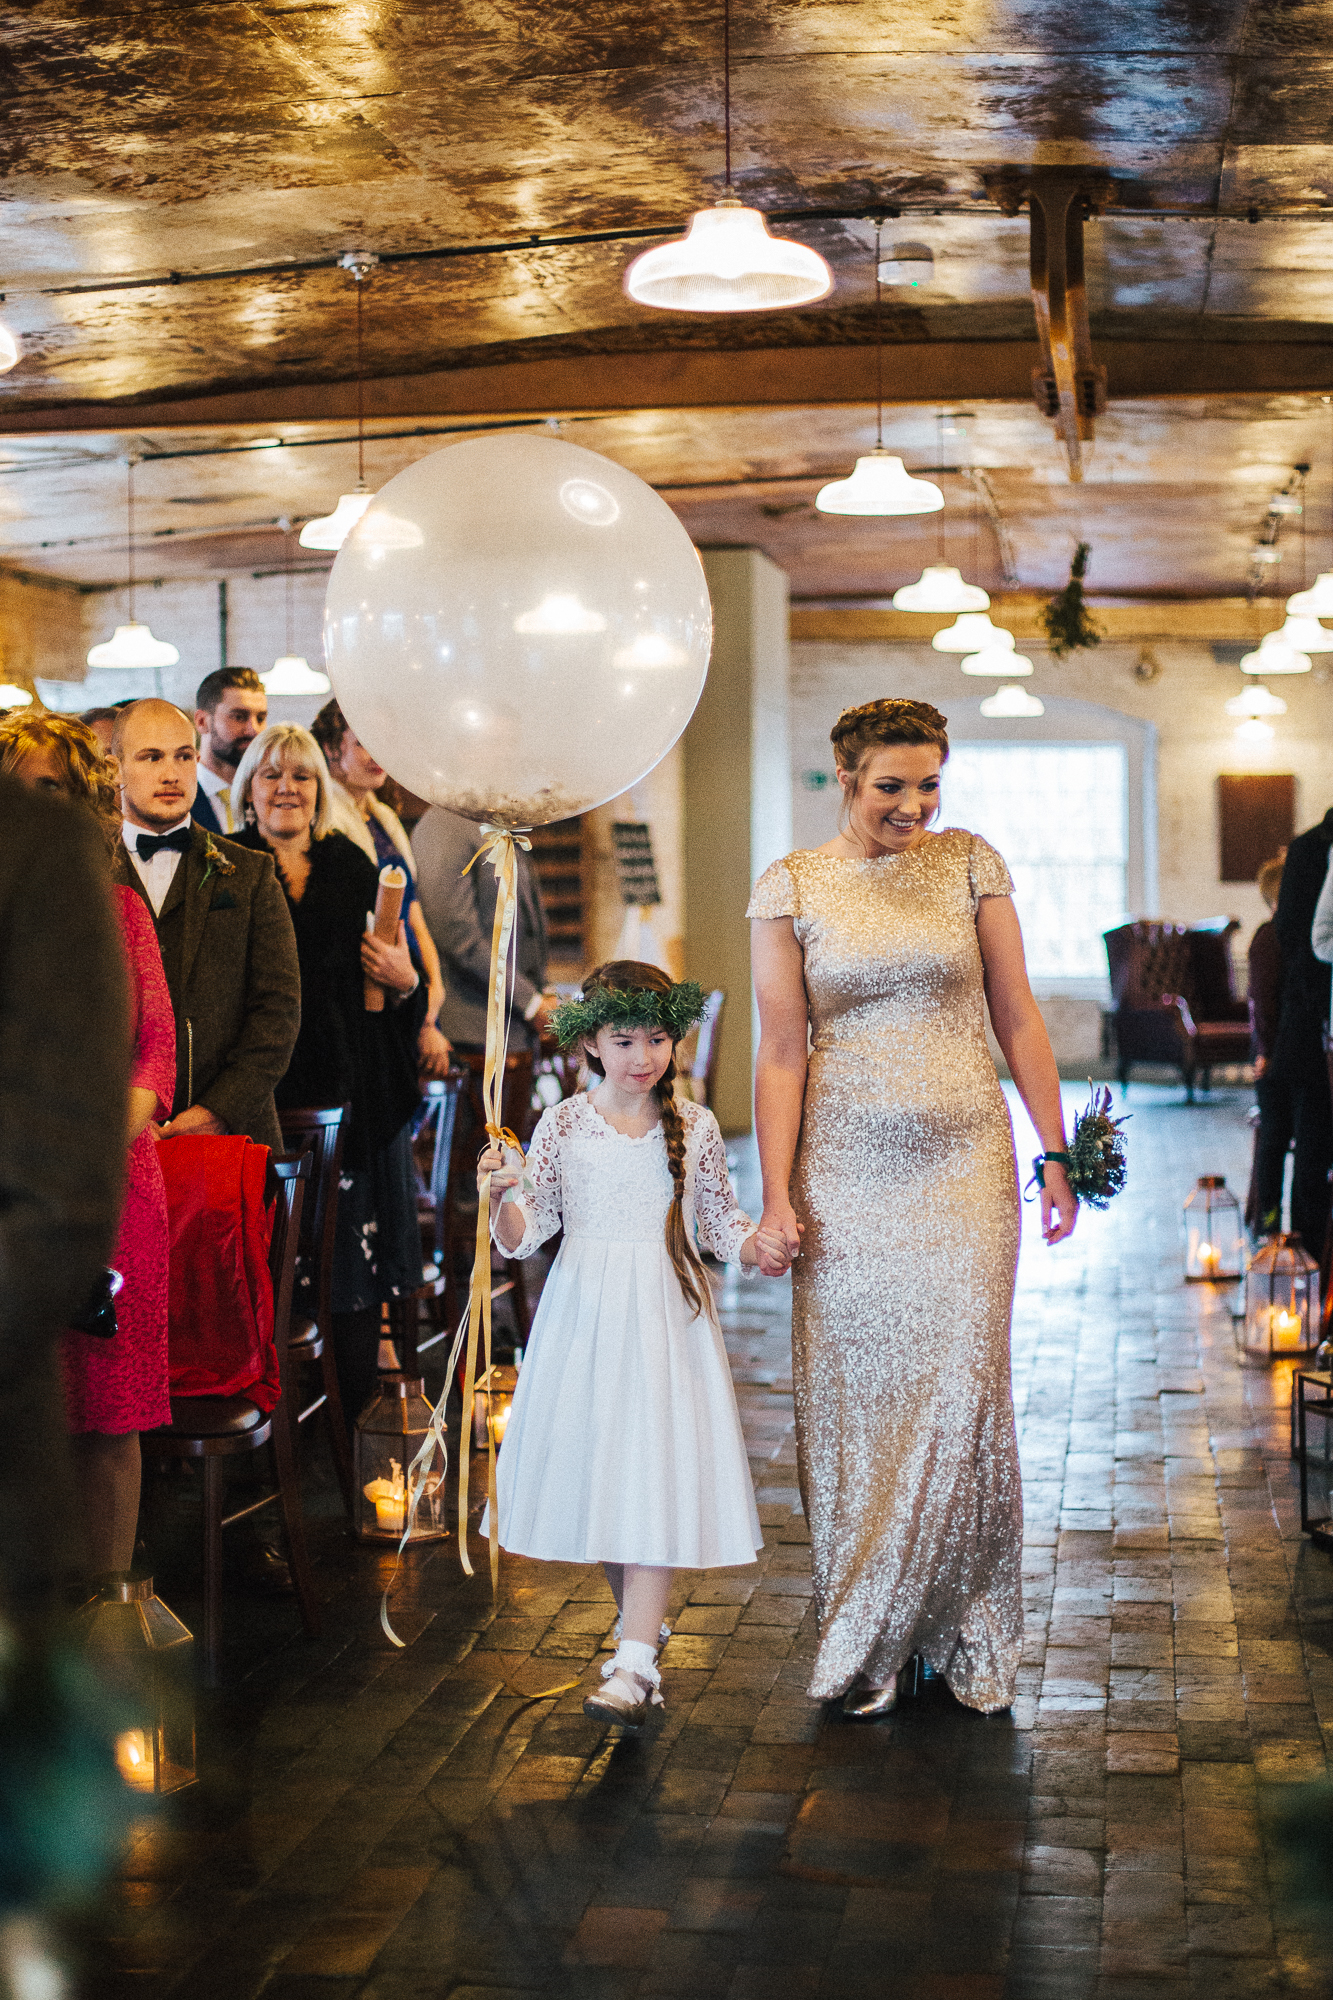 01 Bridesmaid wearing a sequin dress and flowergirl carrying a large balloon